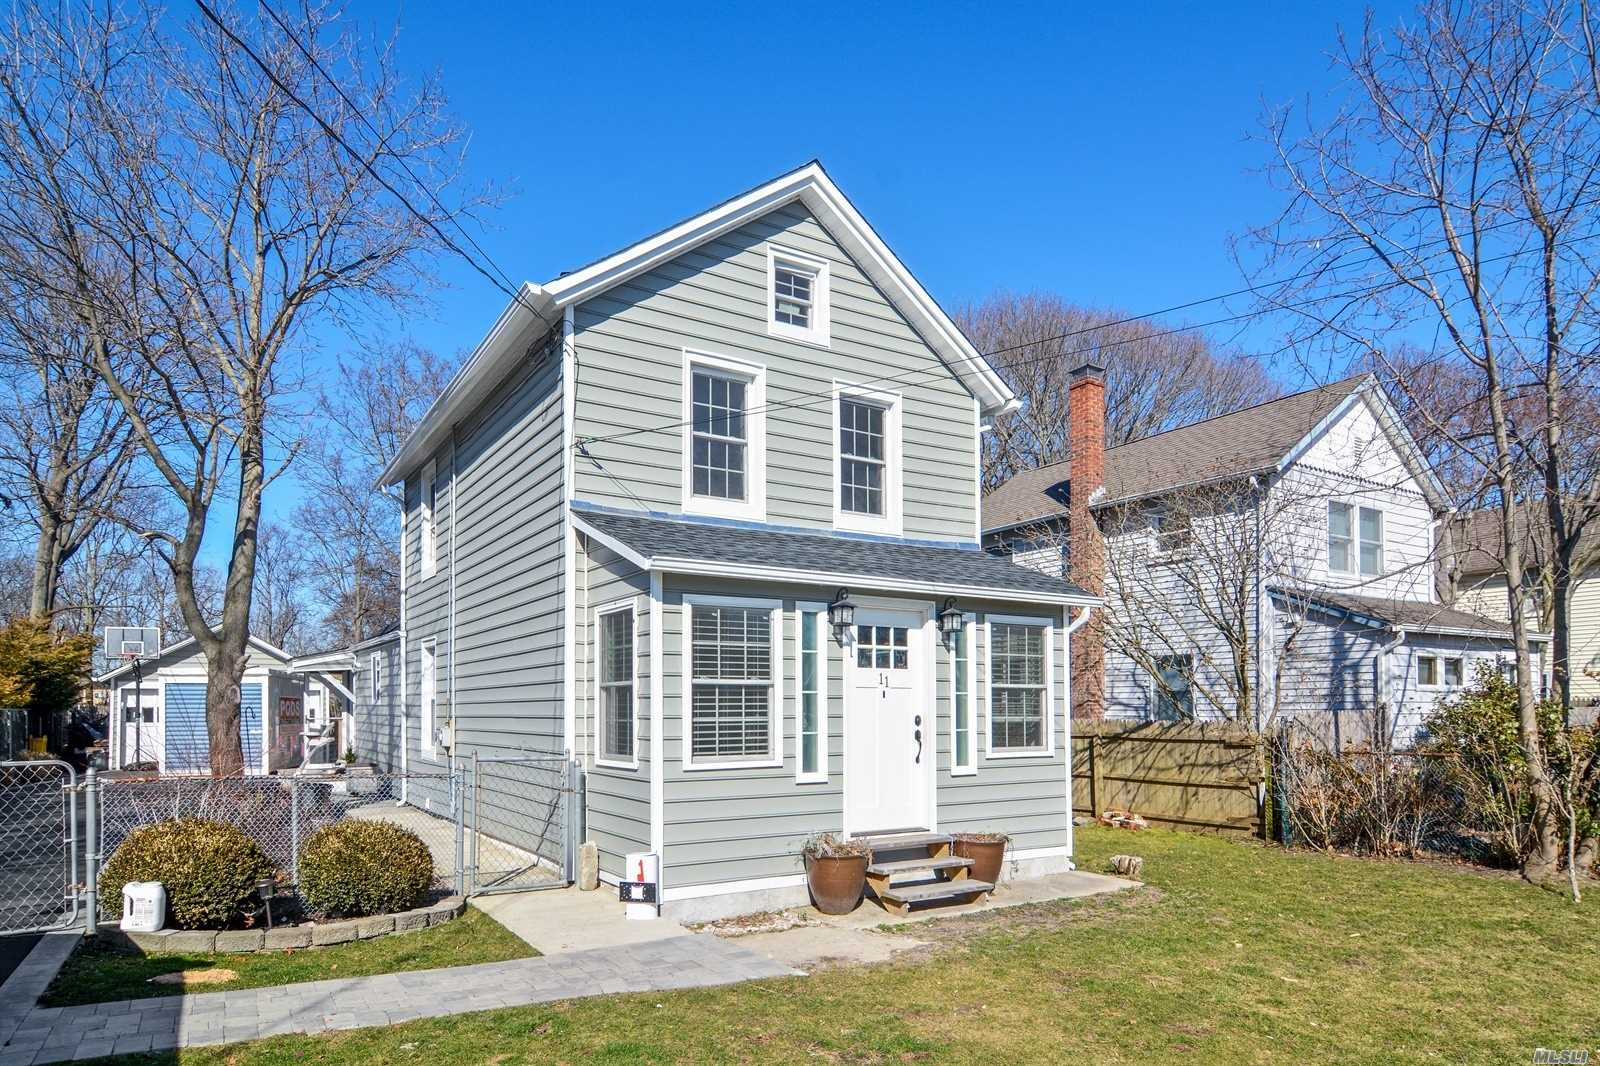 Beautiful Home Minutes Away From Patchogue Village. This Home Has Many New Updates Siding, Driveway, Roof, Floor, Windows, And Many More. Most Important Low Taxes.